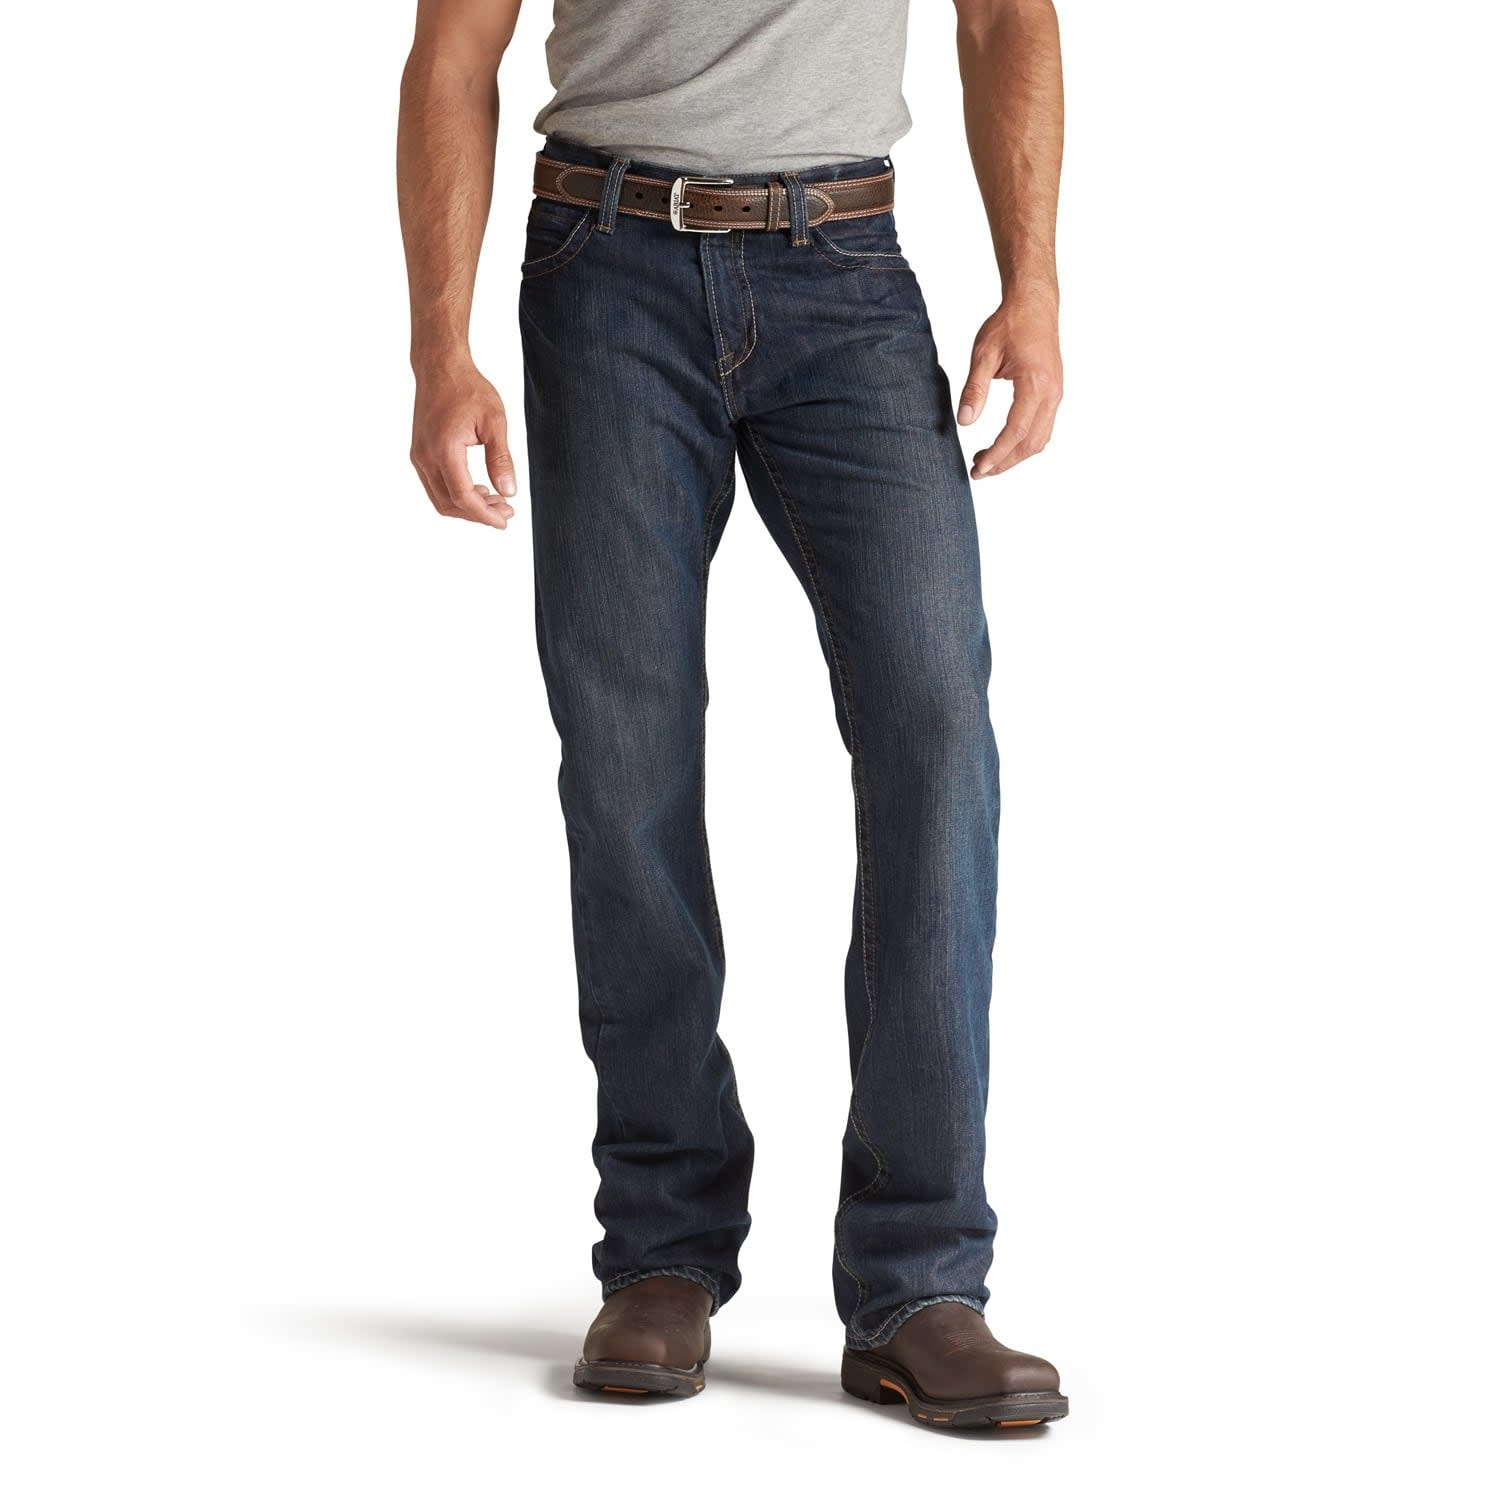 ARIAT WORK PANTS - M4 SHALE - Rocky Mountain FR Clothing Outlet